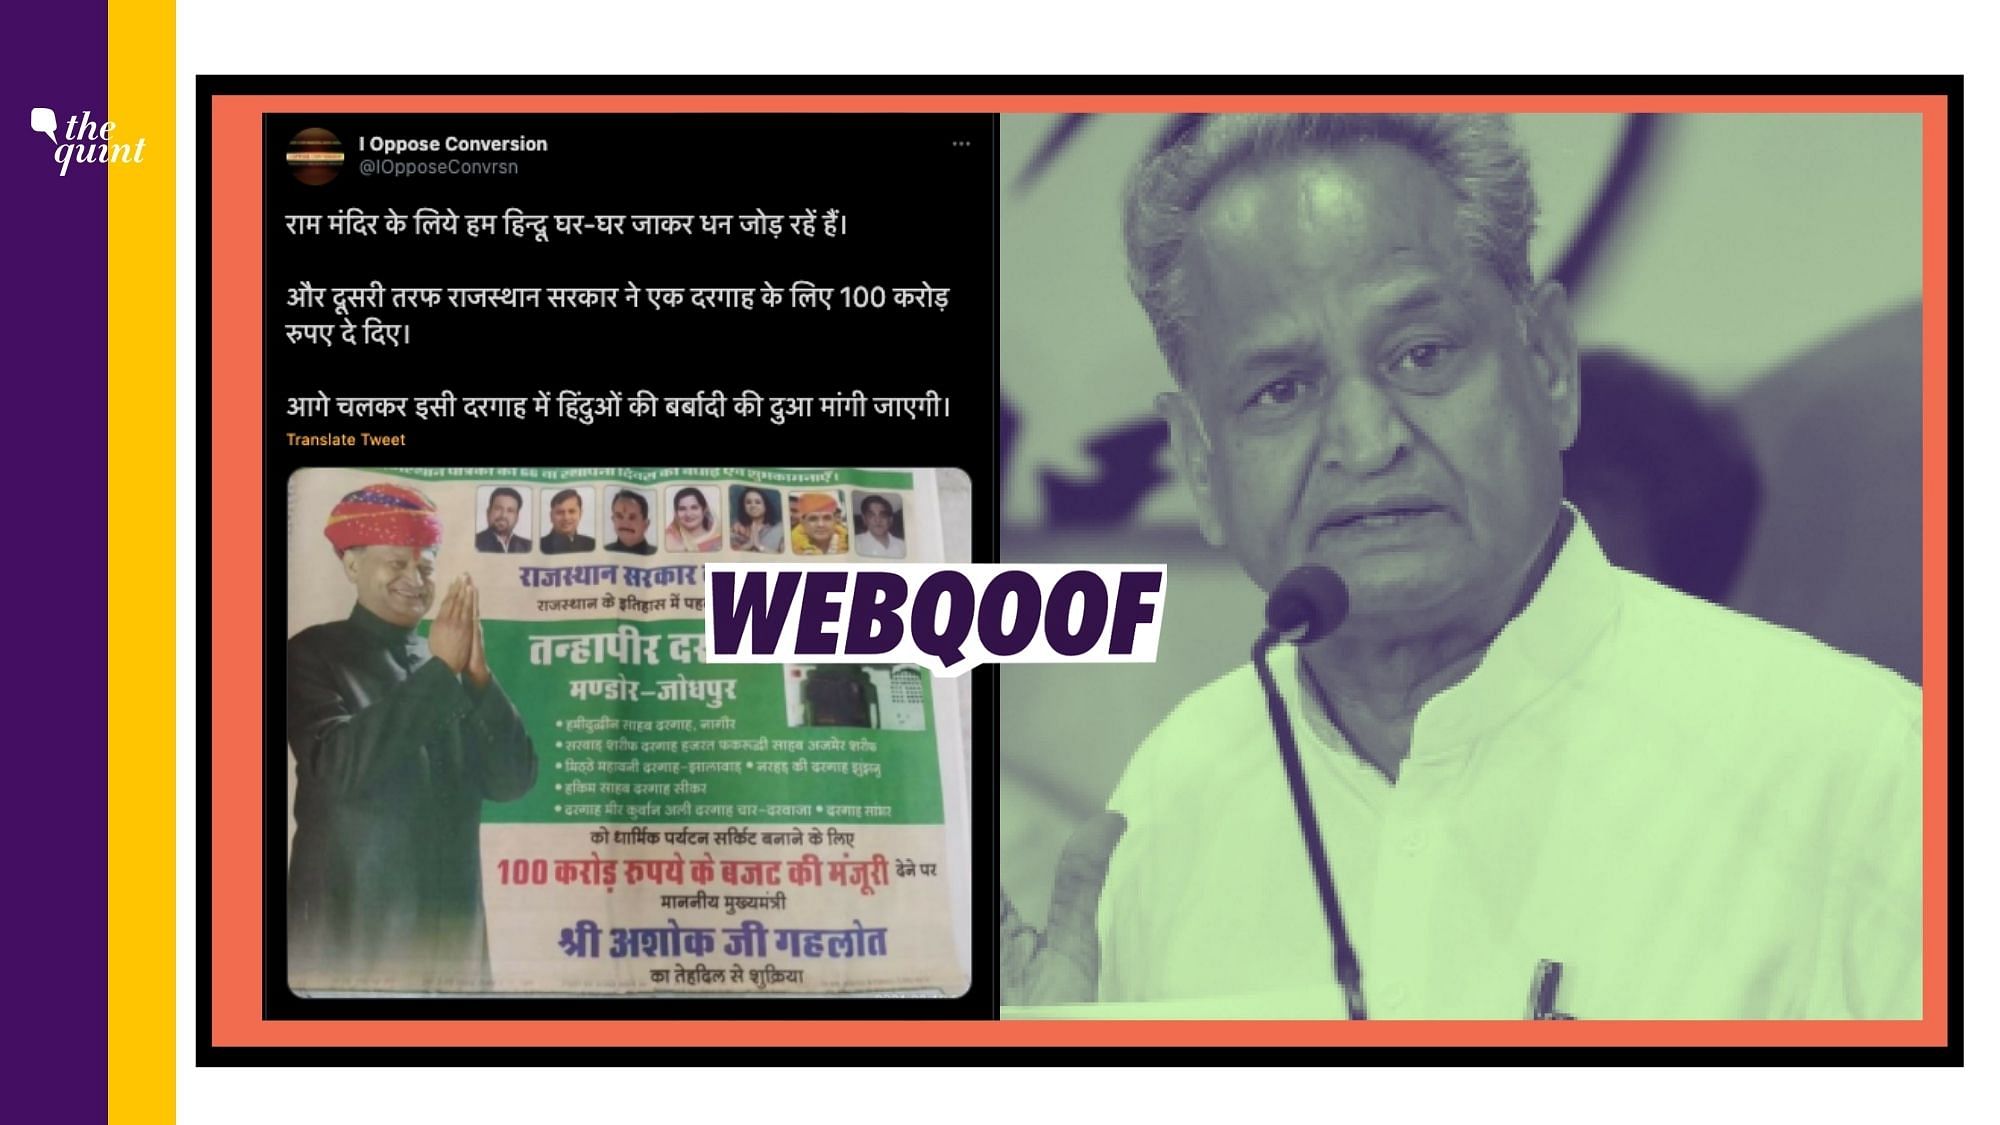 Several people on the internet claimed that Rajasthan <a href="https://www.thequint.com/topic/cm-ashok-gehlot">Chief Minister Ashok Gehlot</a> had allocated Rs 100 crore to a dargah in the state.